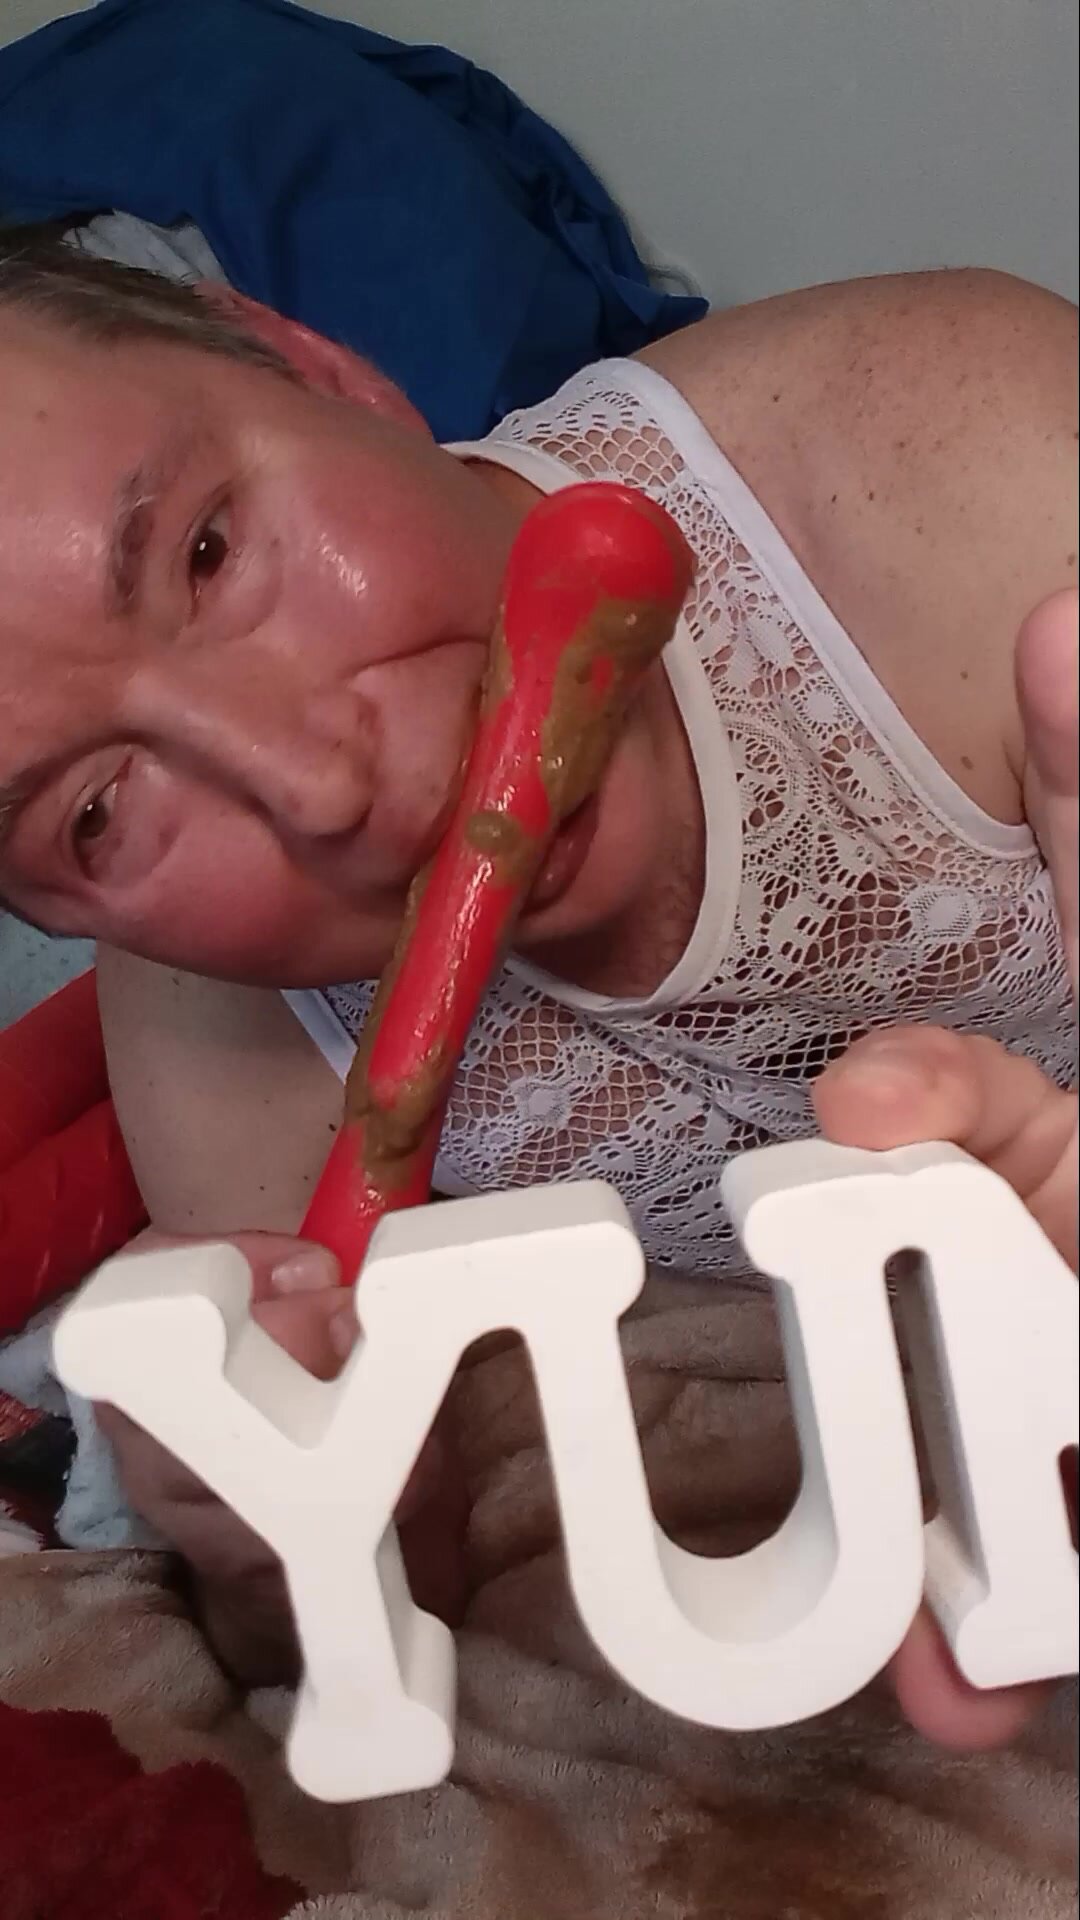 eating the shit on my toy - video 2